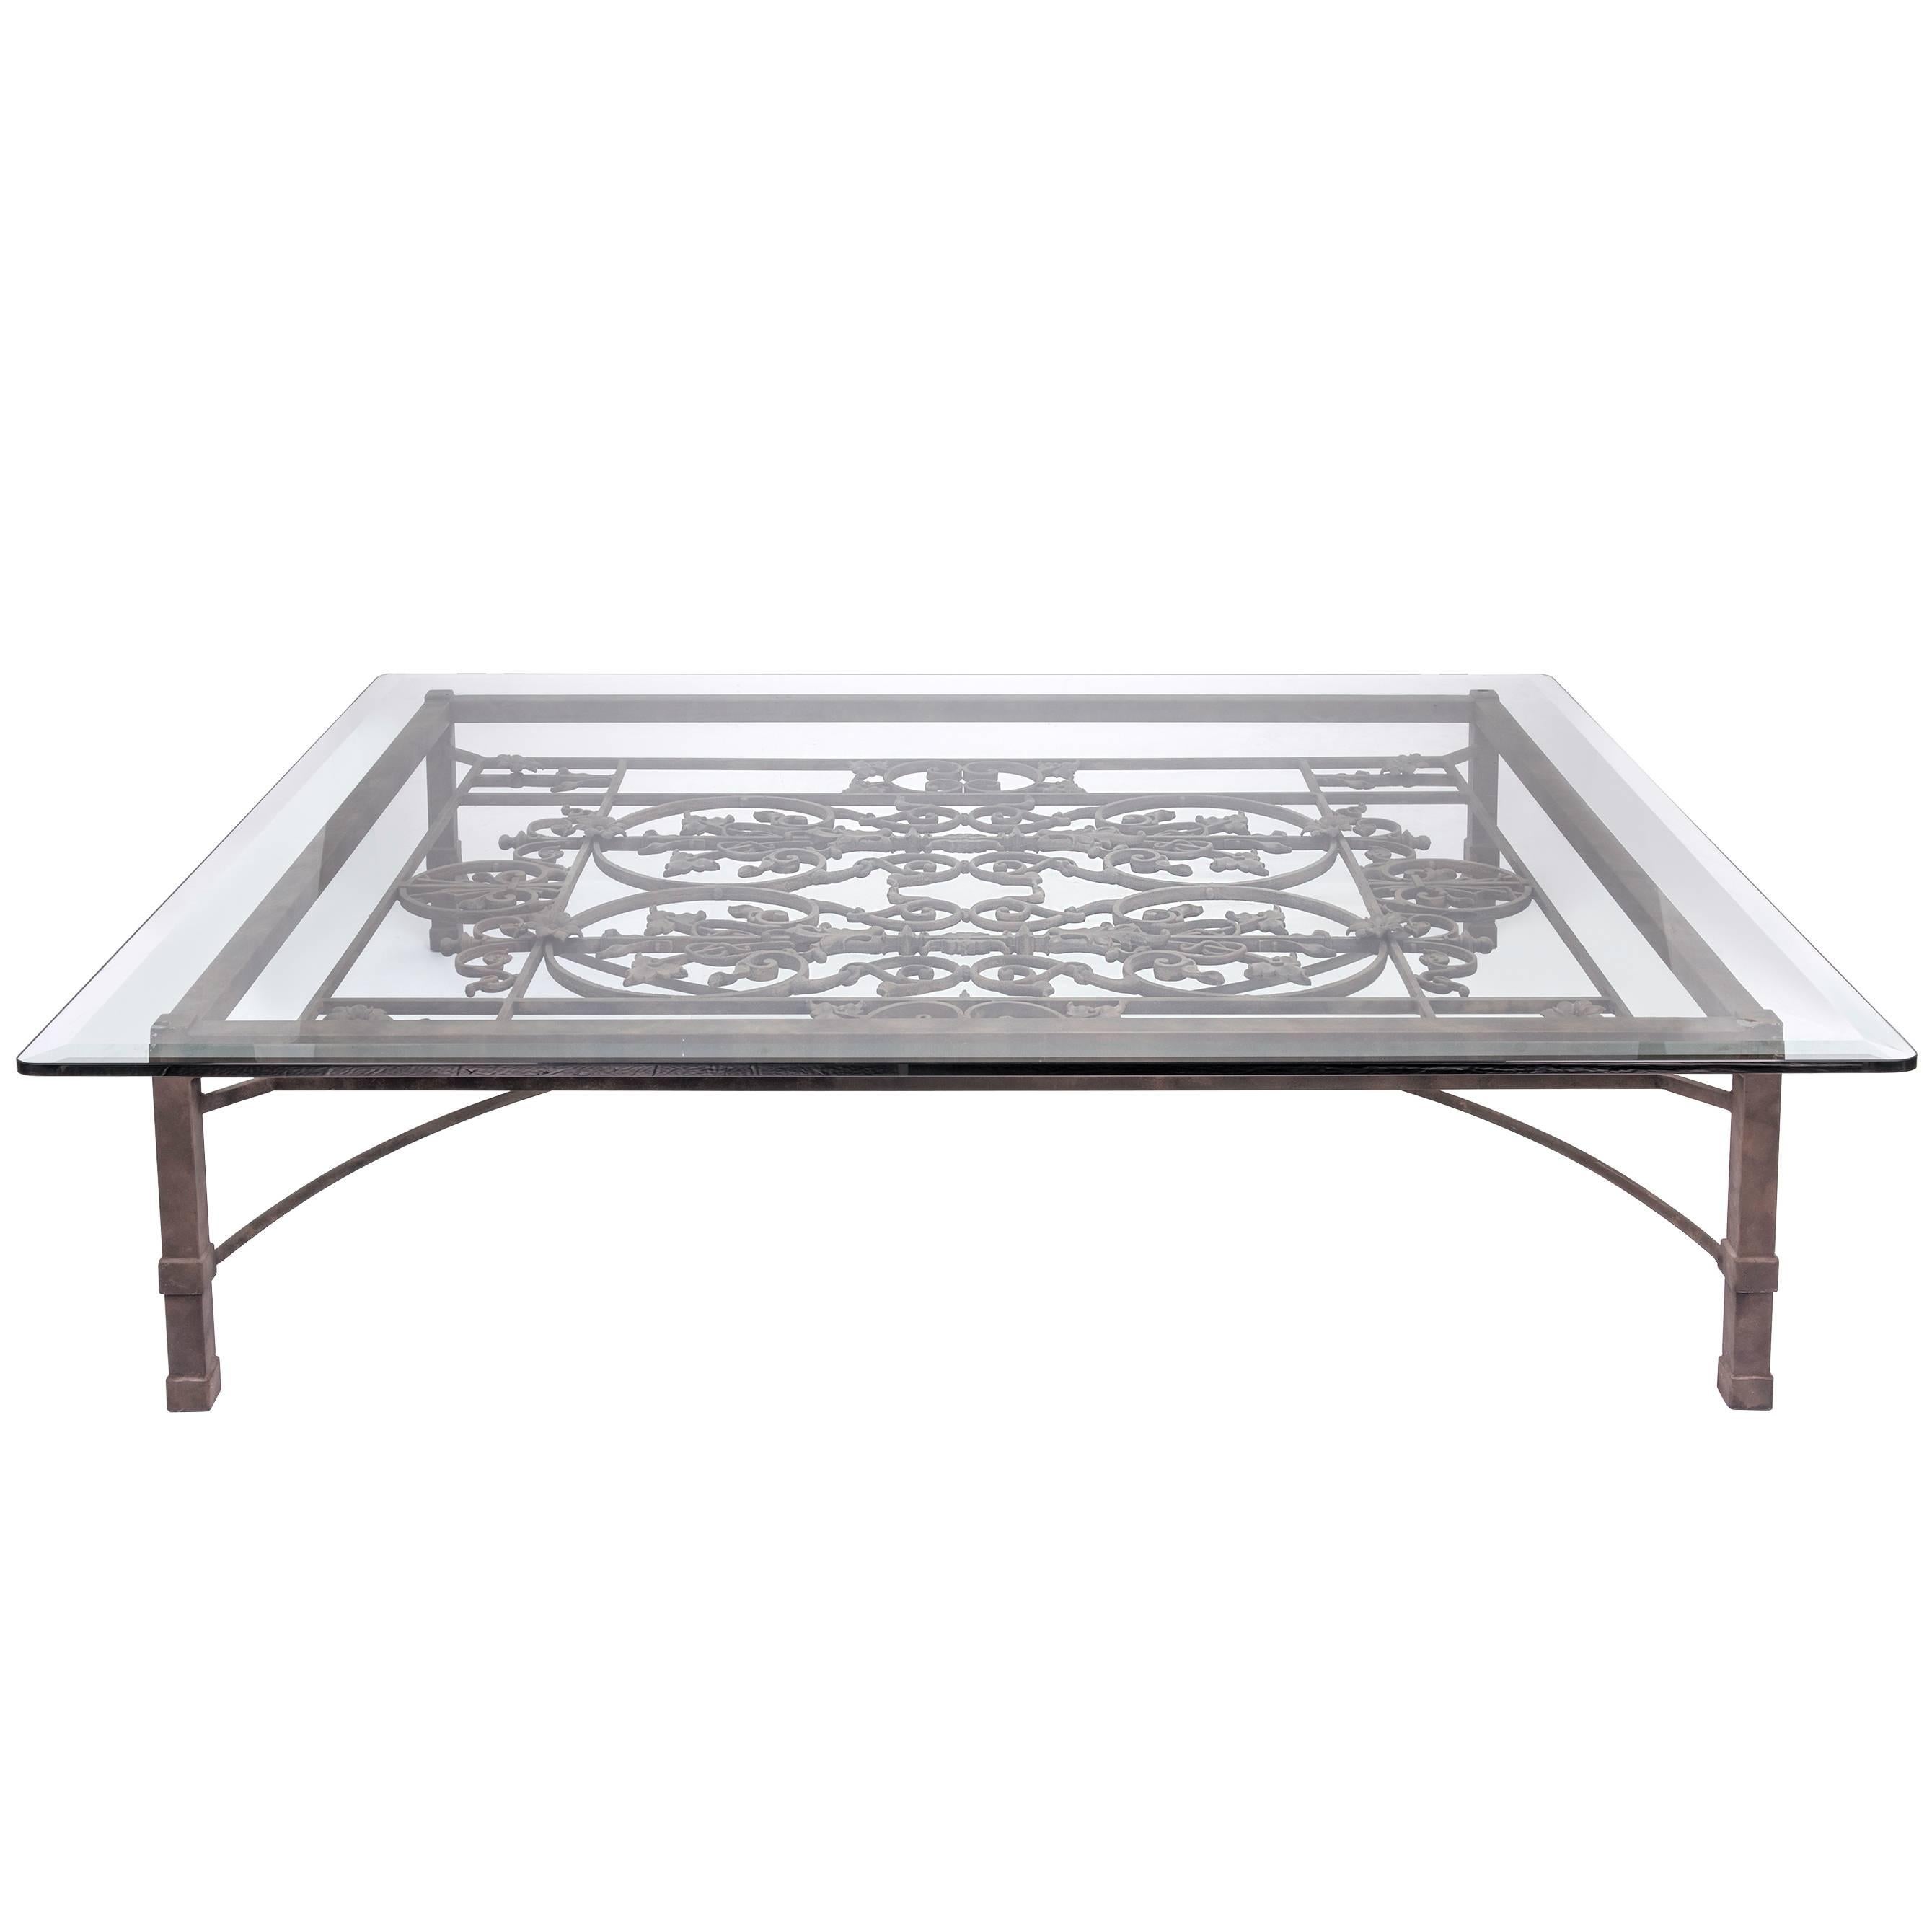 Stunningly beautiful coffee table. The base of the coffee table is made from a beautiful old 19th century iron gate from France. Large overscale size.
Measures: Iron base is 52; X 64.25
Glass is 3/4  thick.
Overall size with glass top: 60 X 72x18.25